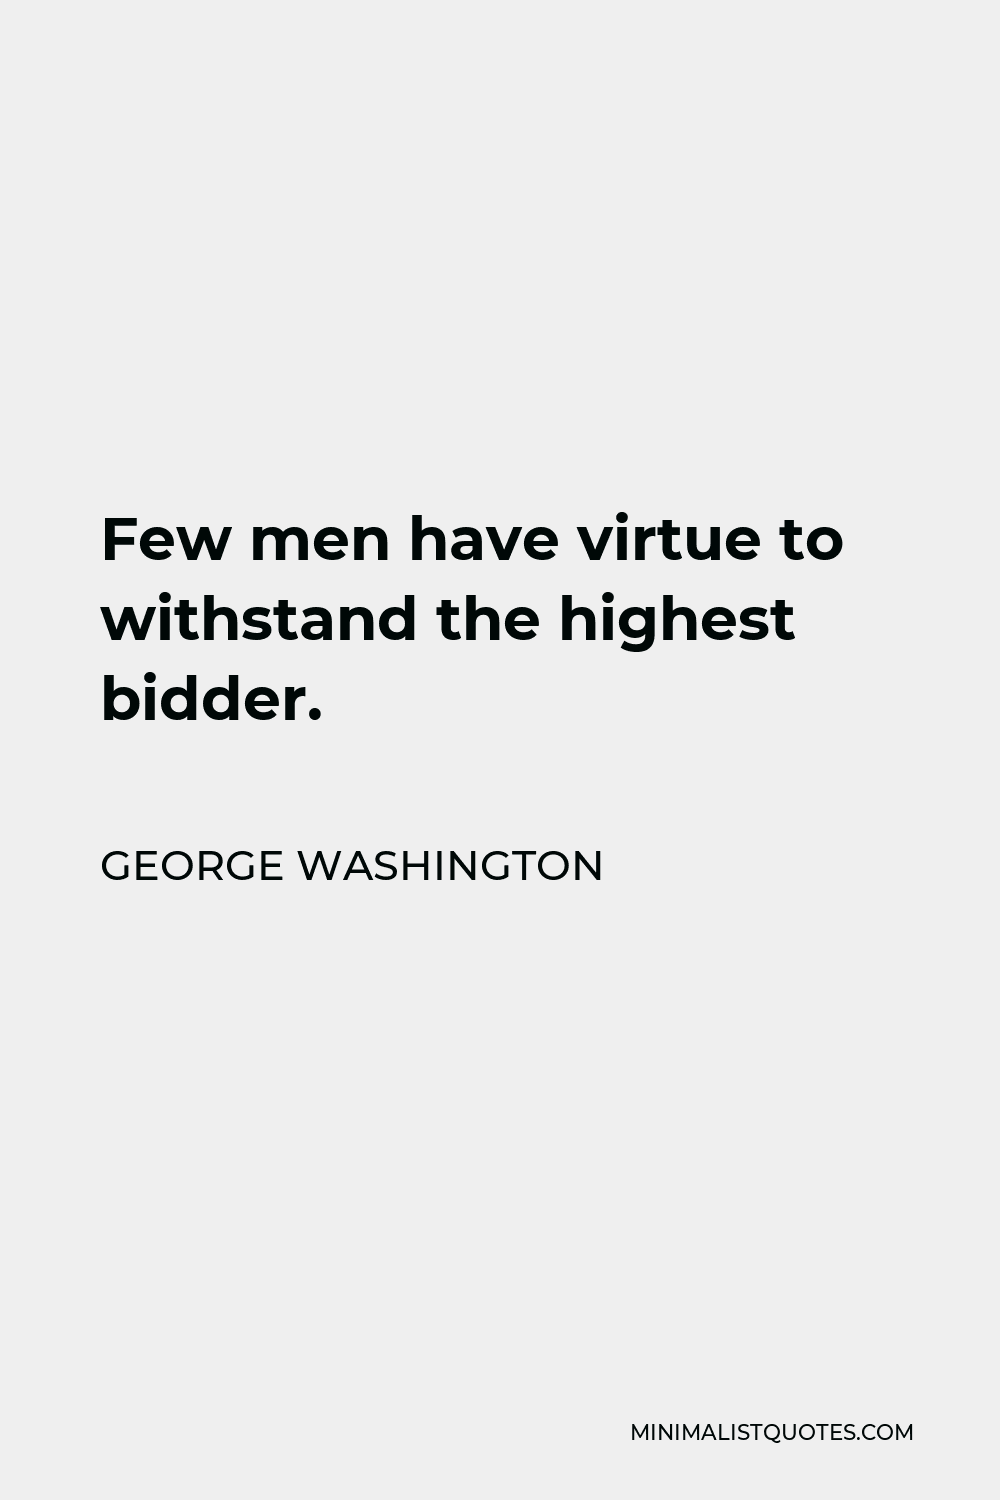 George Washington Quote - Few men have virtue to withstand the highest bidder.